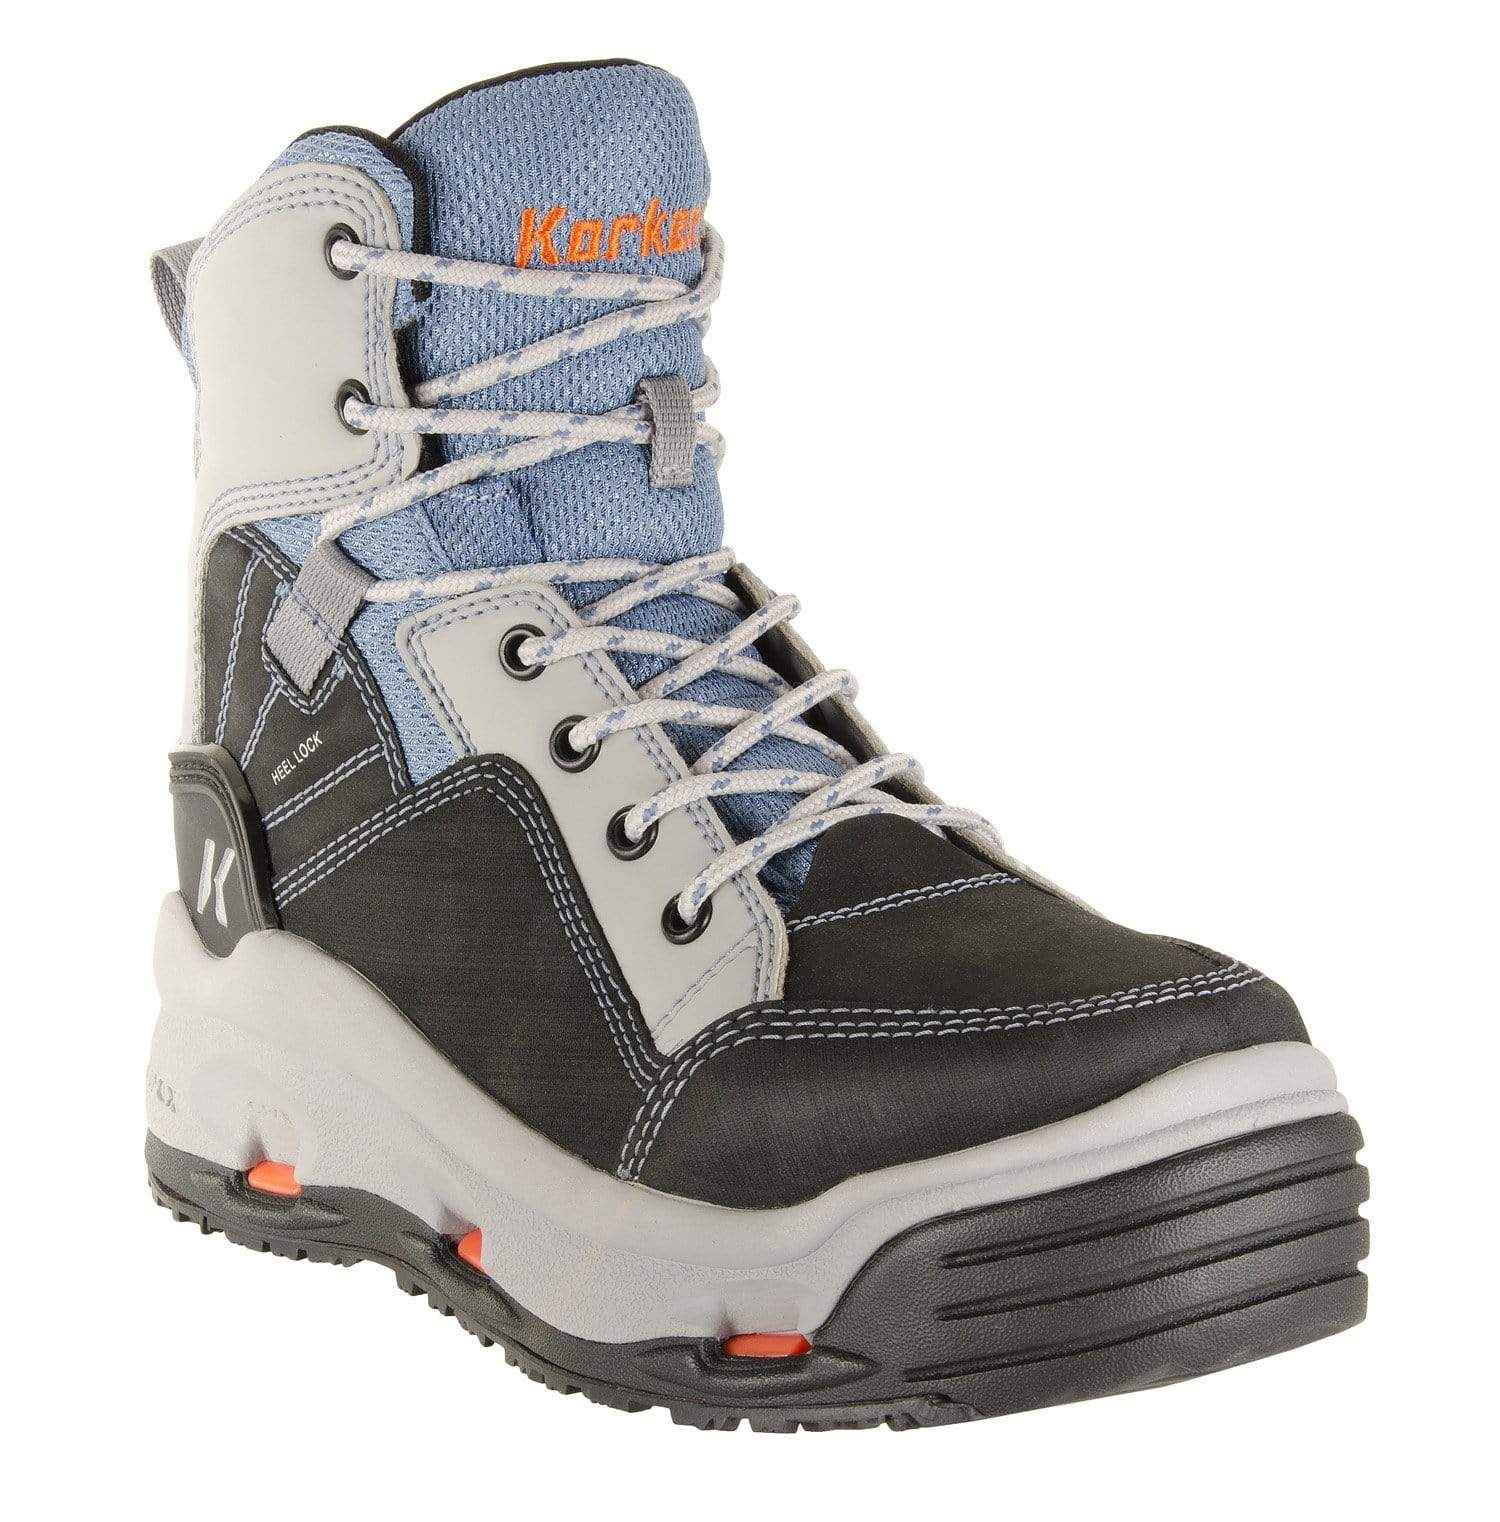 Review: Korkers Darkhorse wading boots